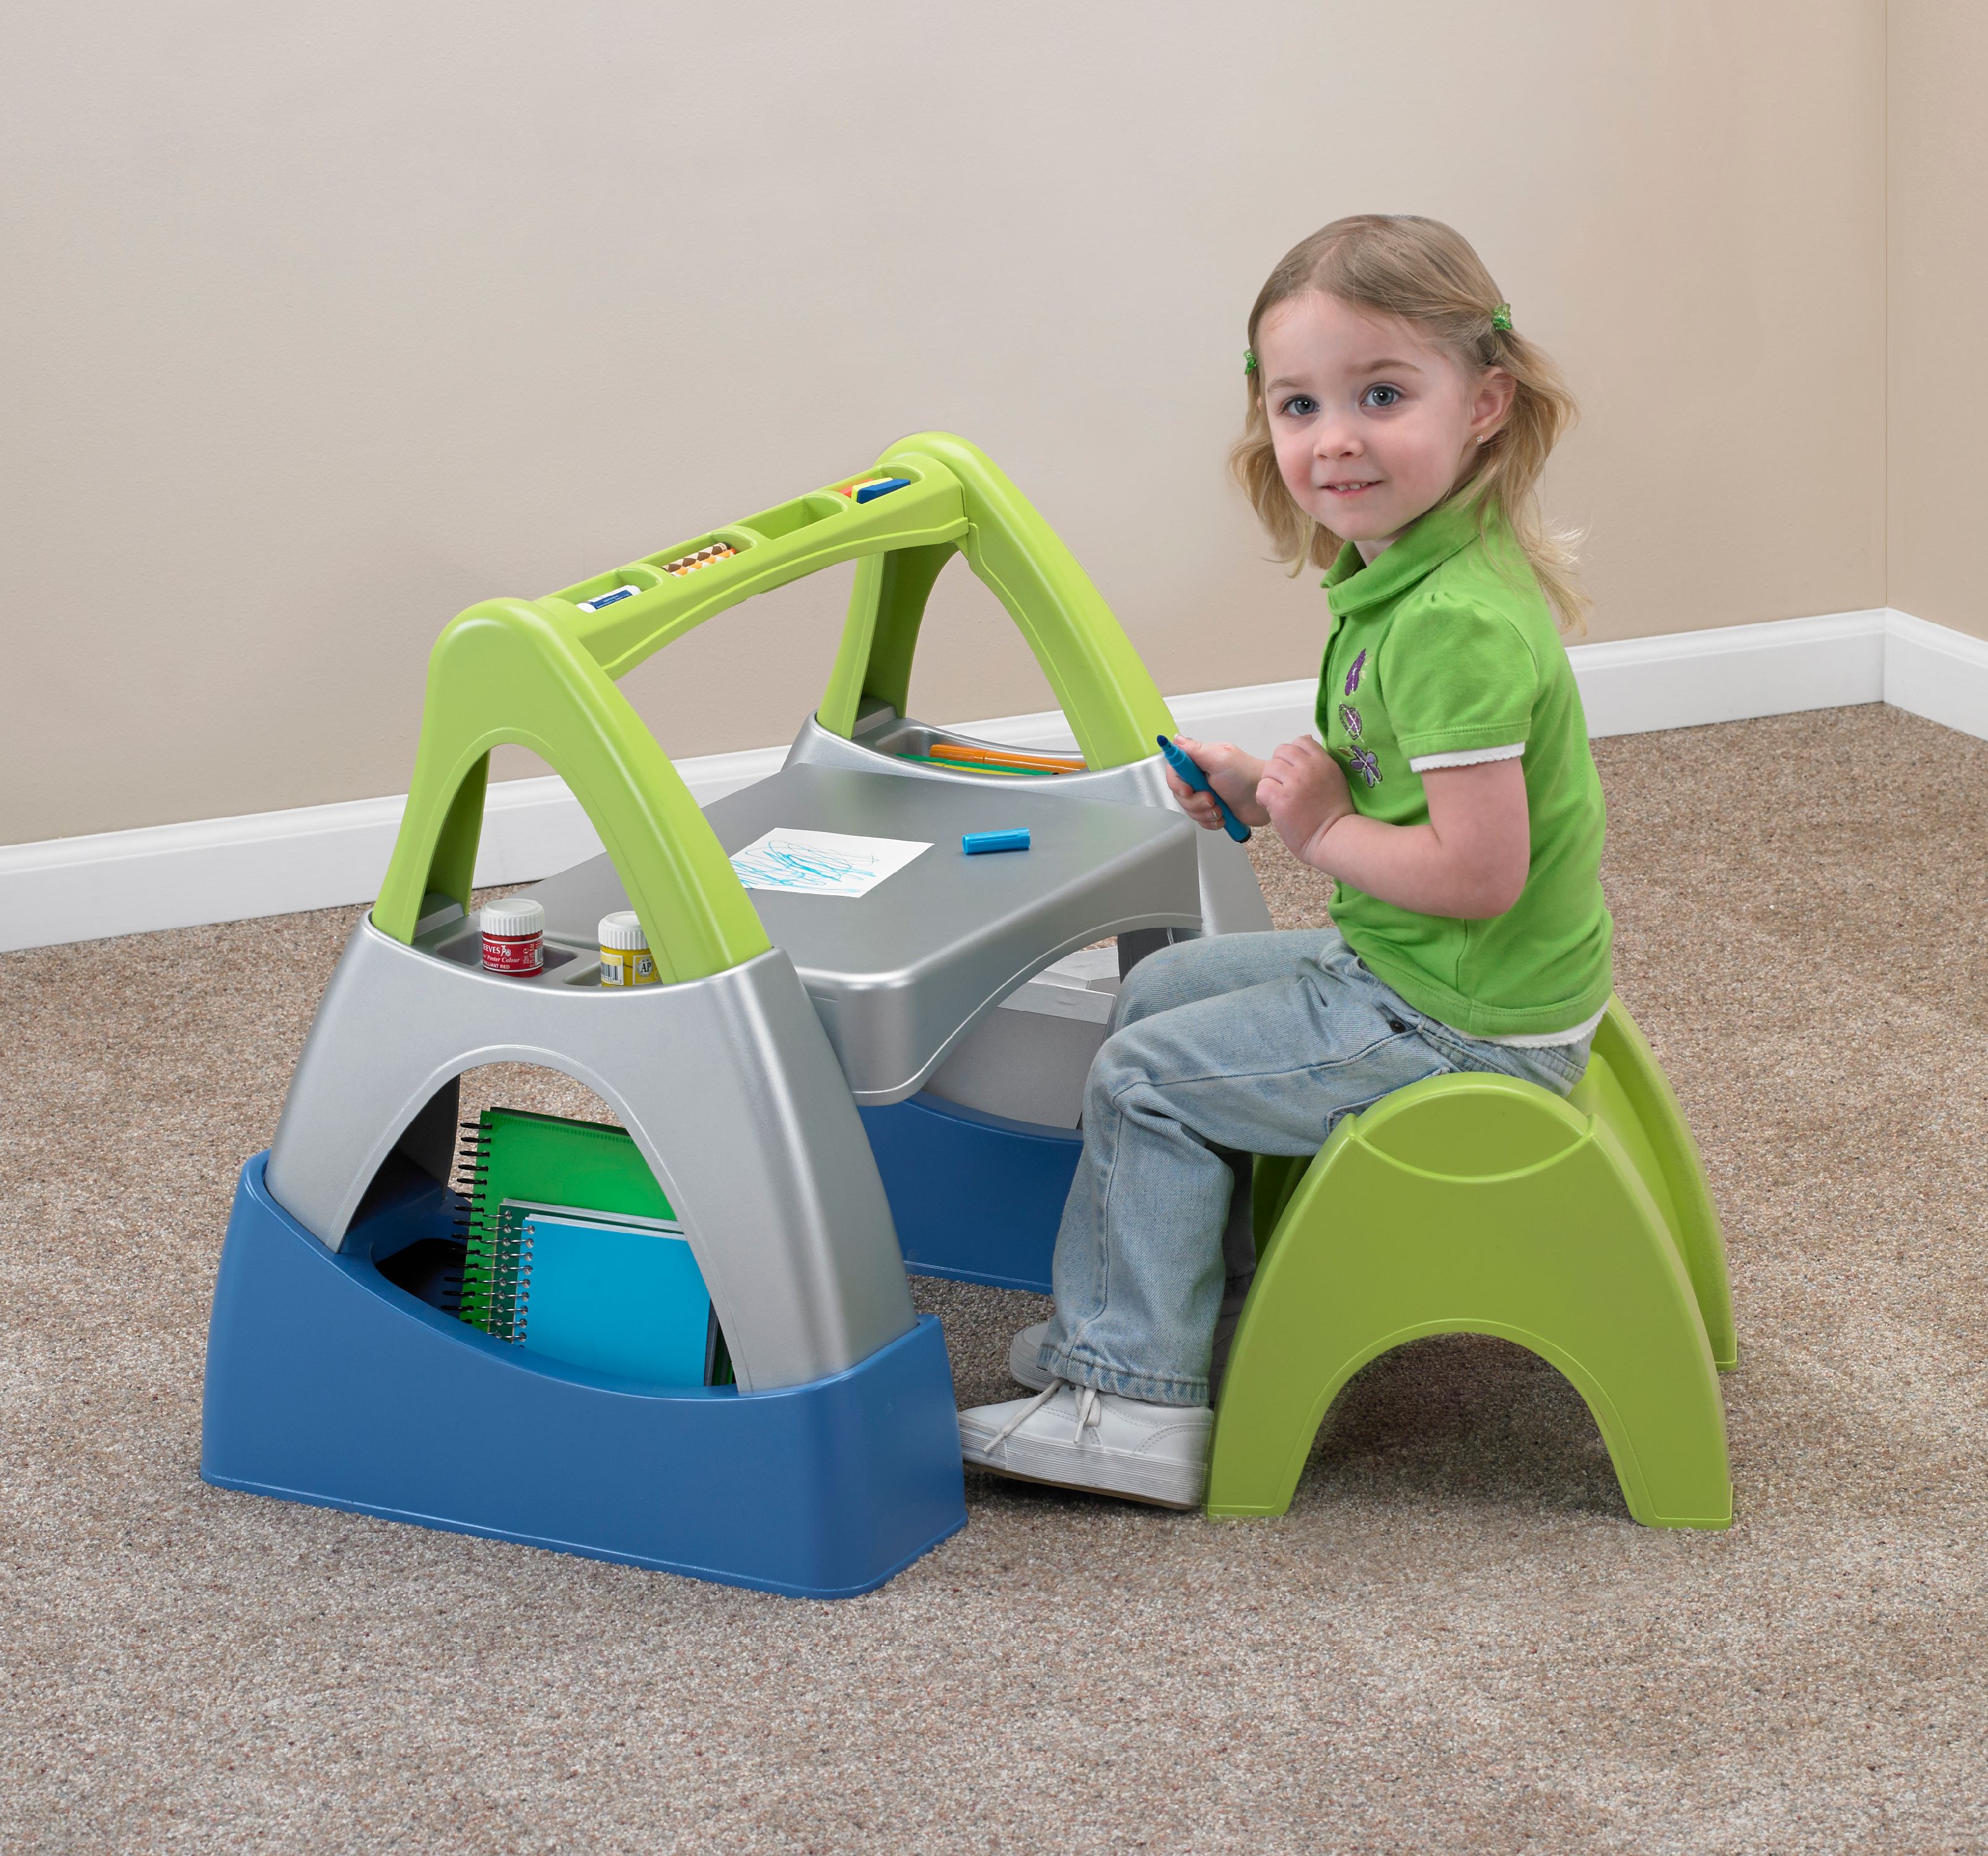 American Plastic Toys Study 'N' Play Desk & Chair Set - image 4 of 5